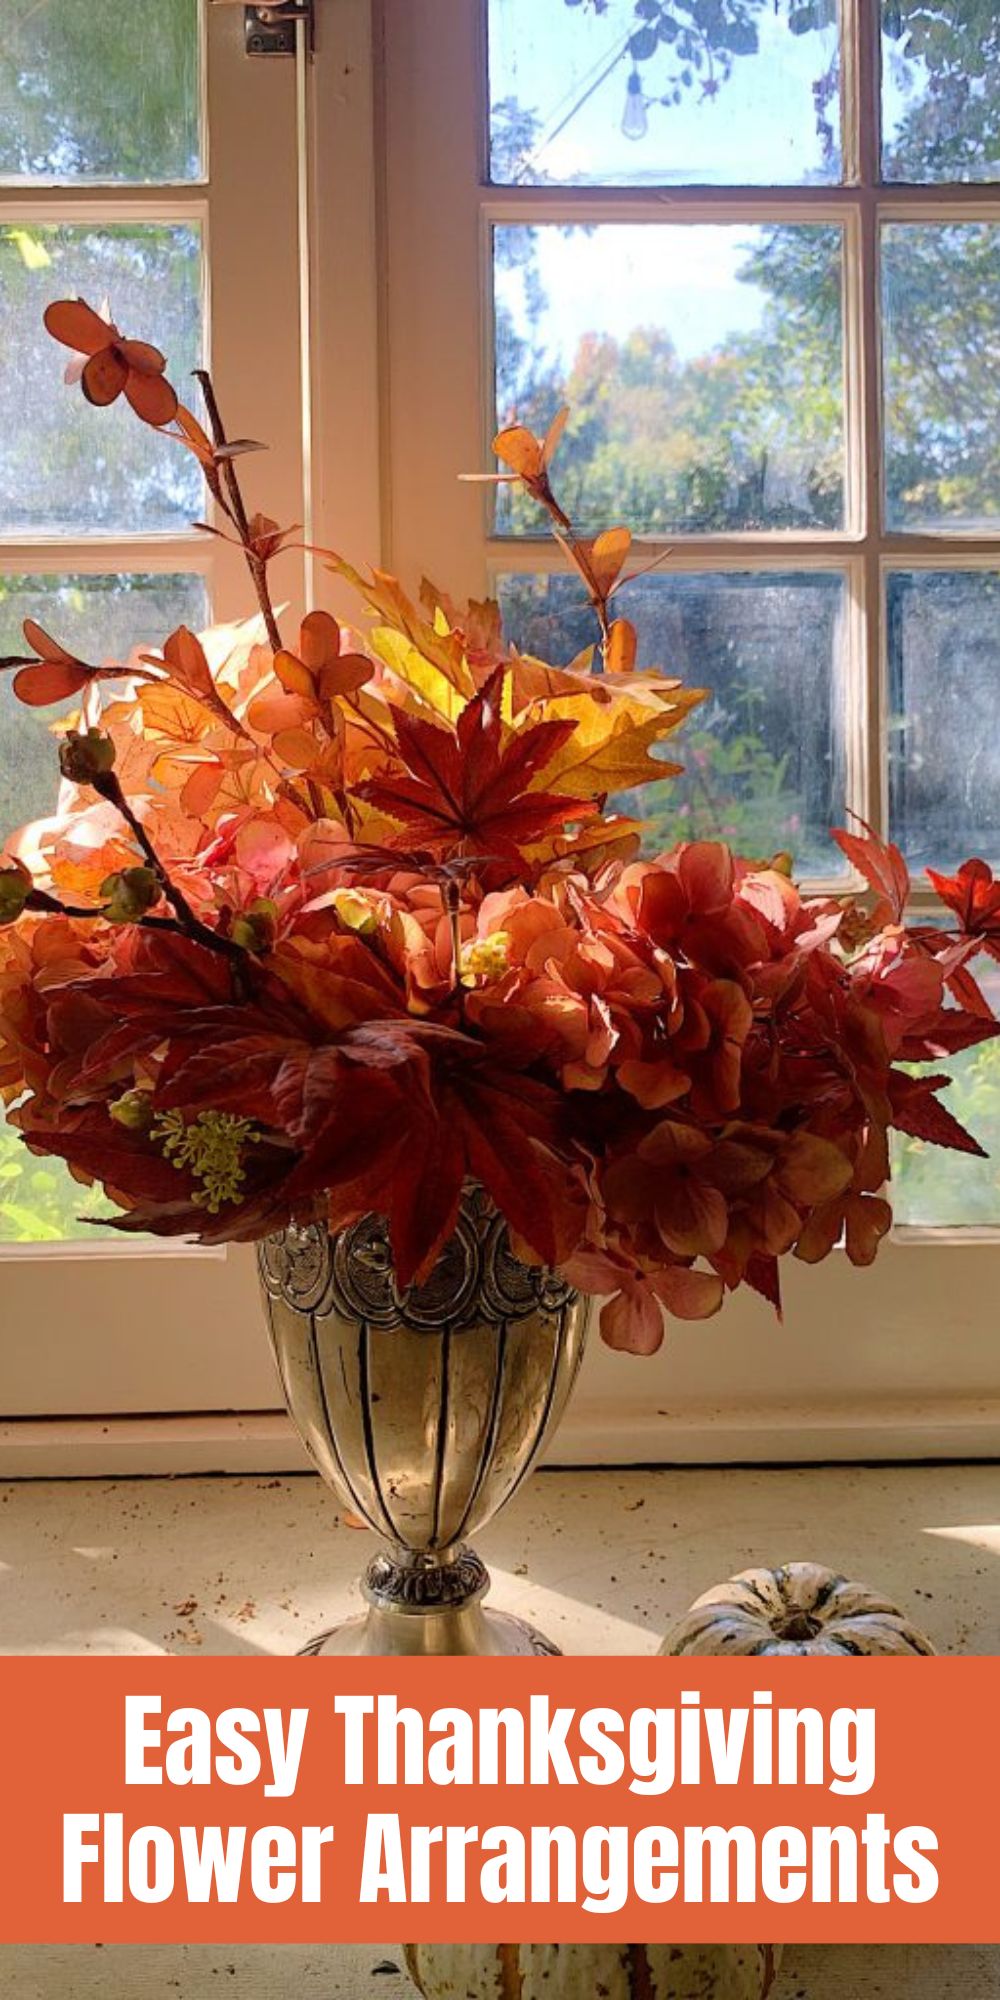 Today I am sharing three Thanksgiving flower arrangements, one fresh, one faux, and one mixed! I think you are going to like the results.